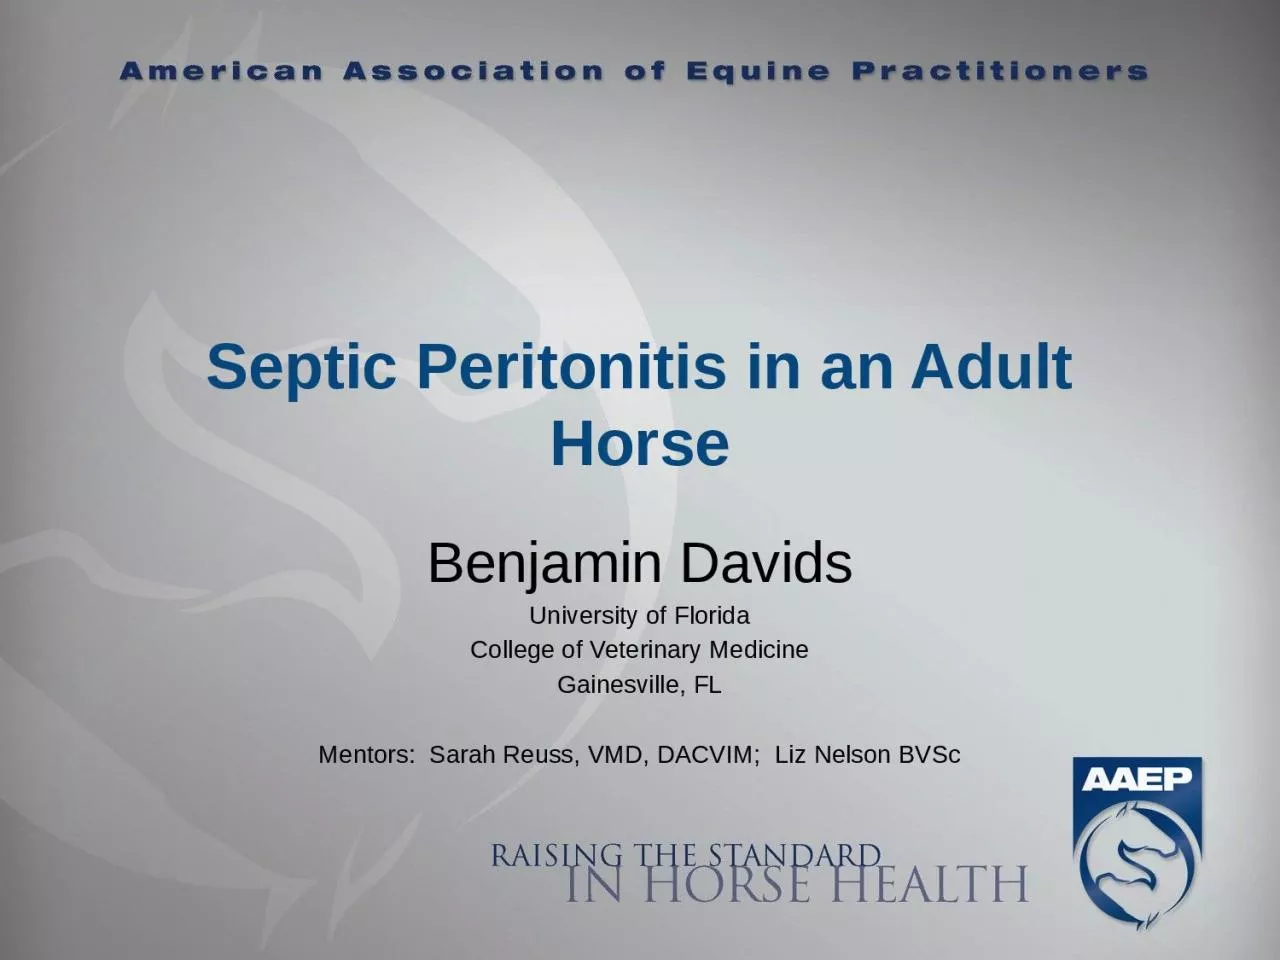 Septic Peritonitis in an Adult Horse